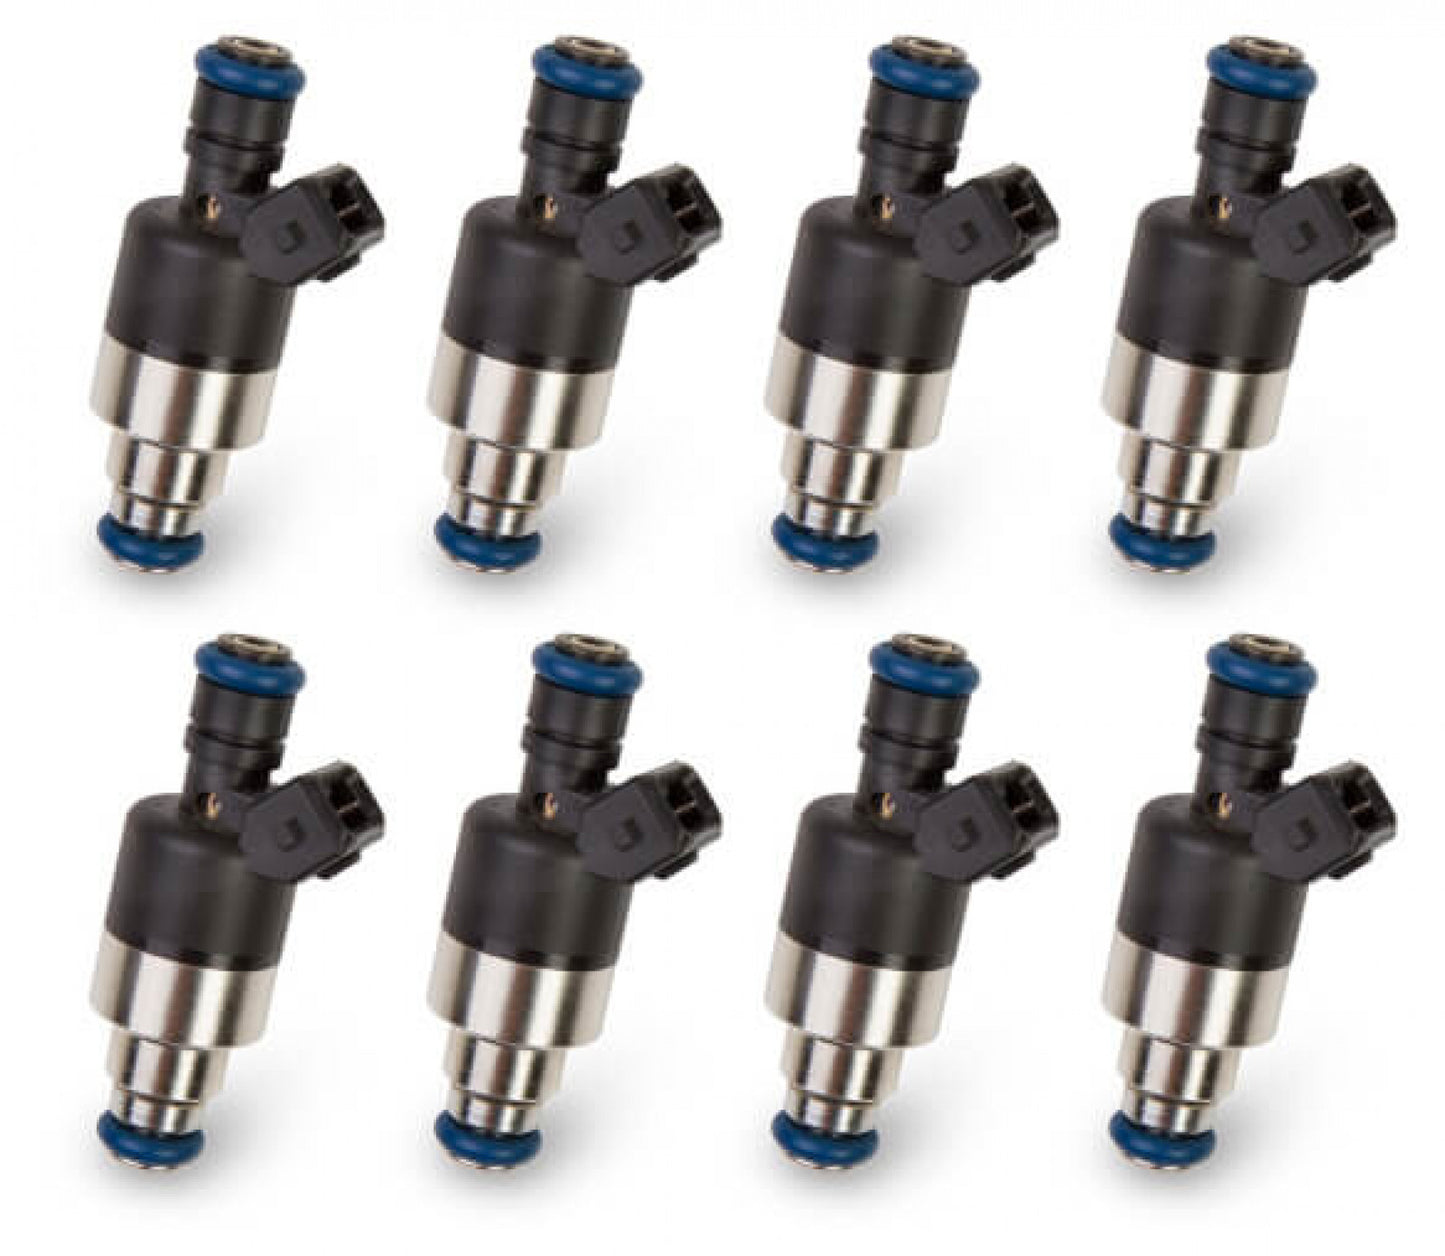 Holley EFI Performance Fuel Injectors - Set of Eight 522-368